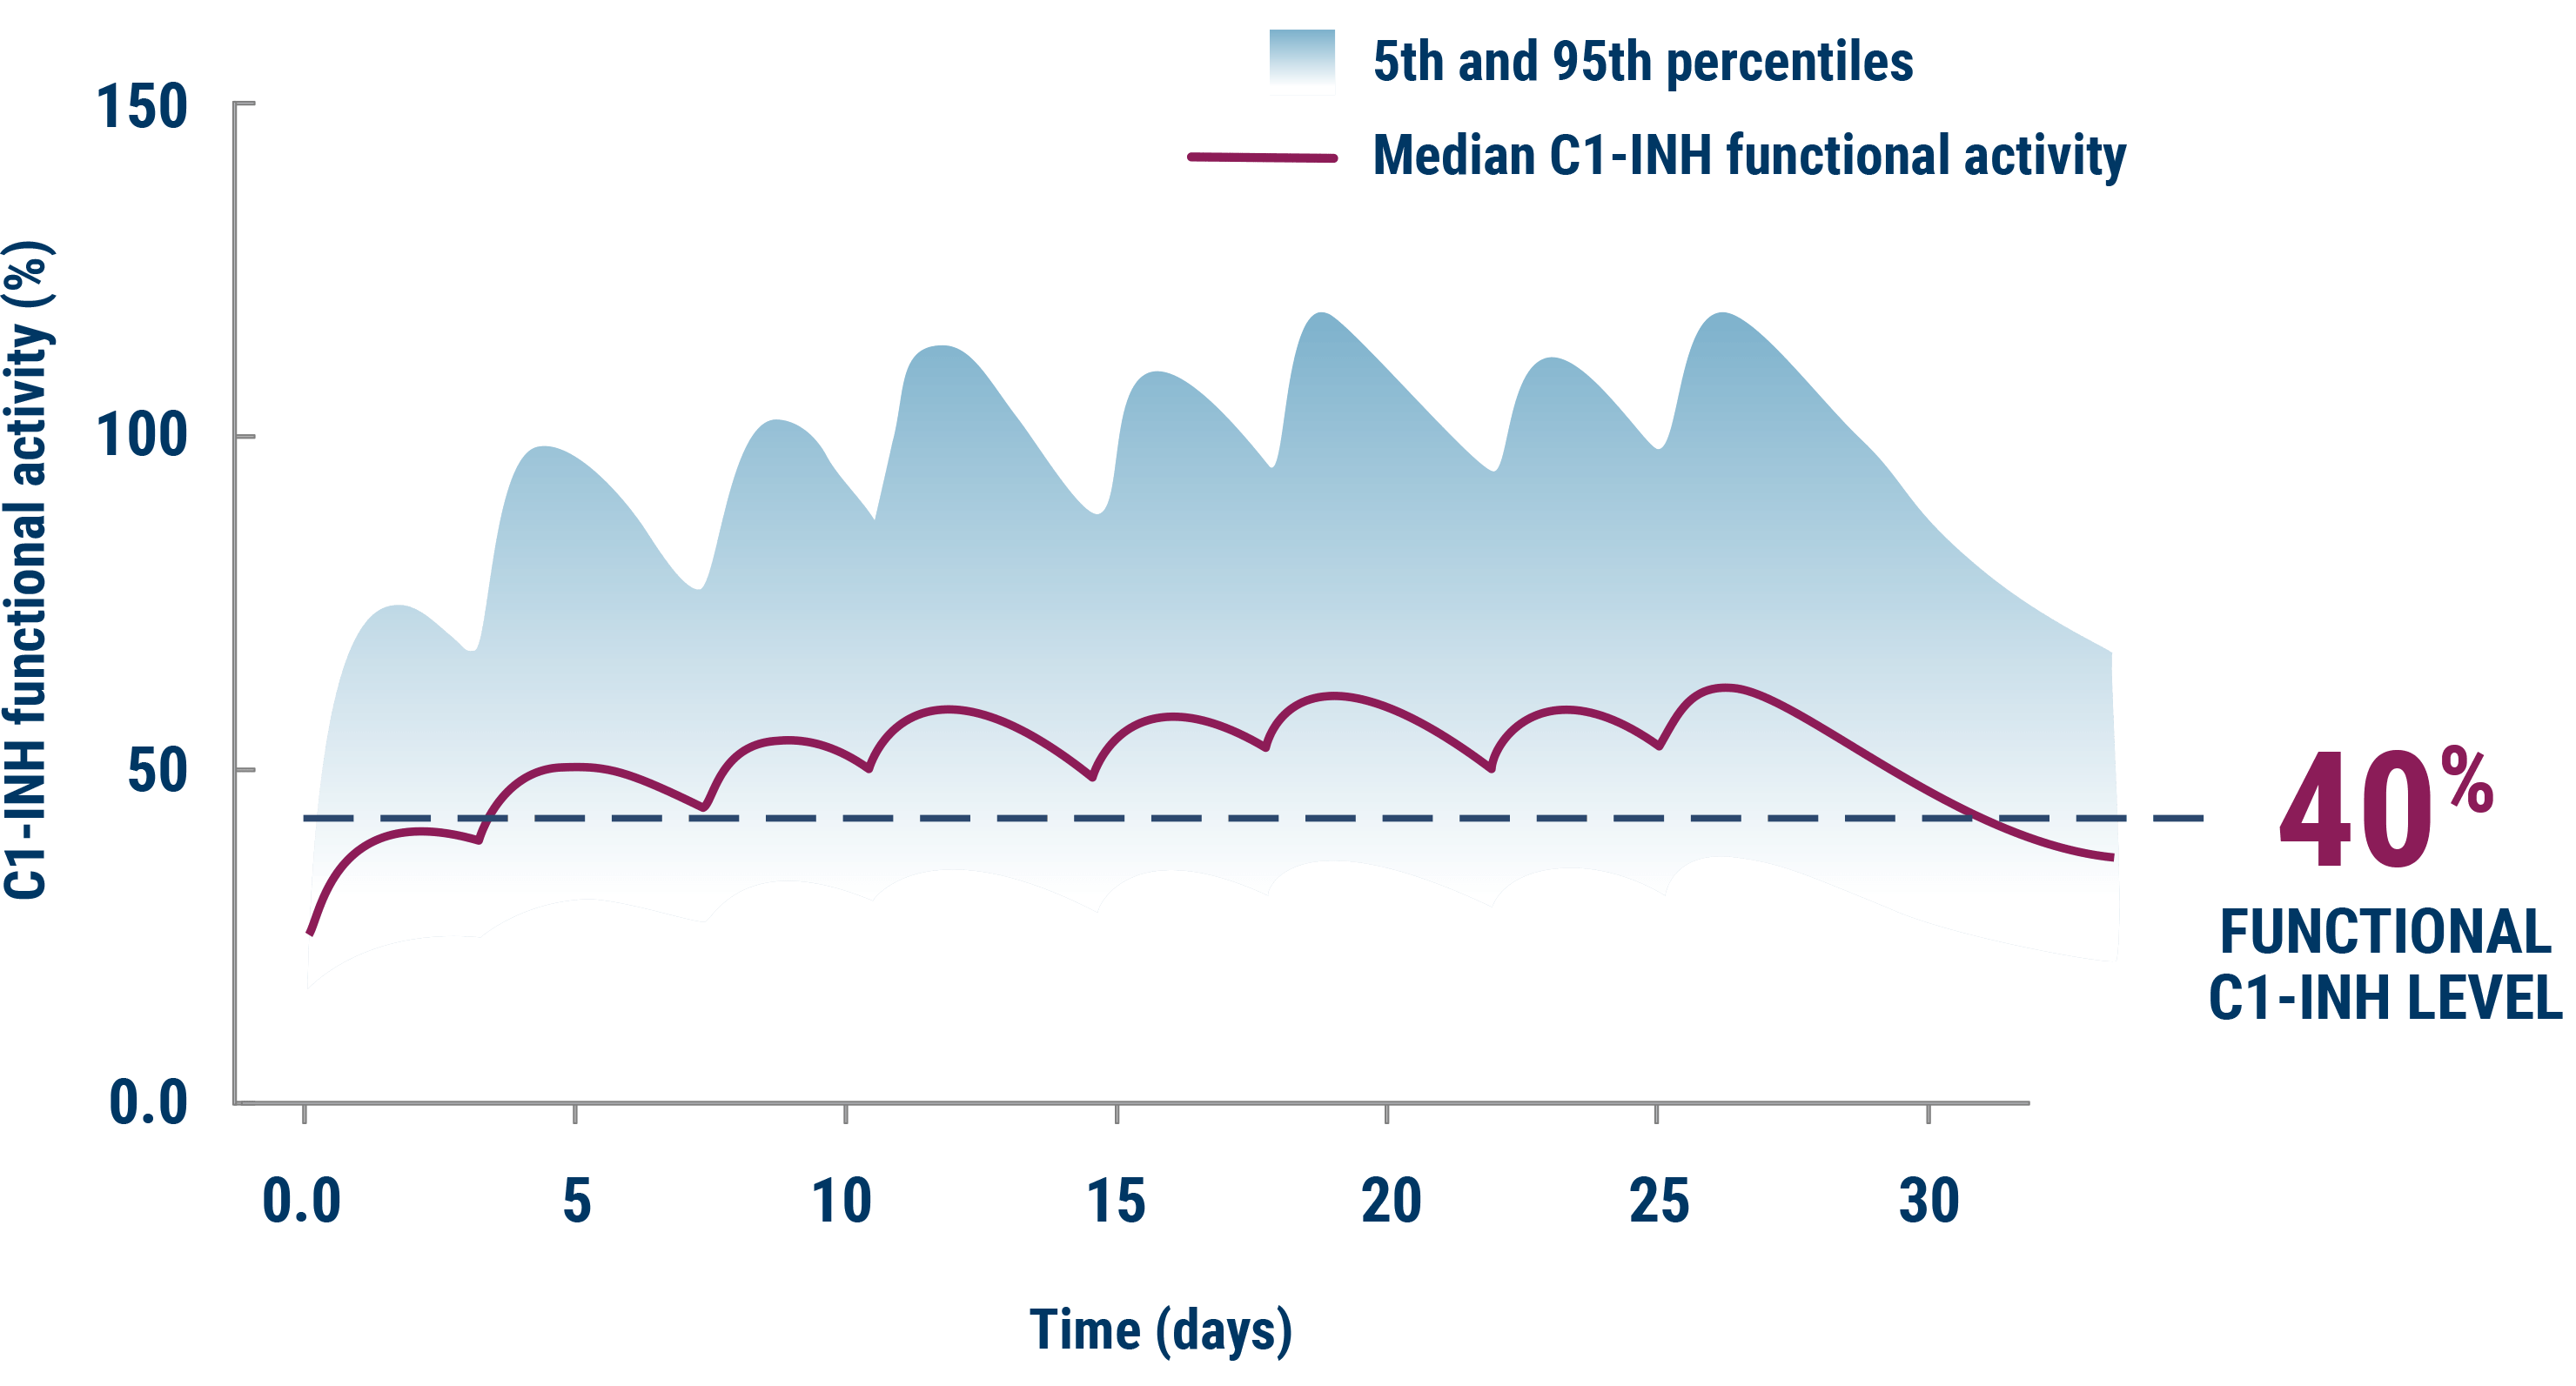 chart showing c1-inh levels over time